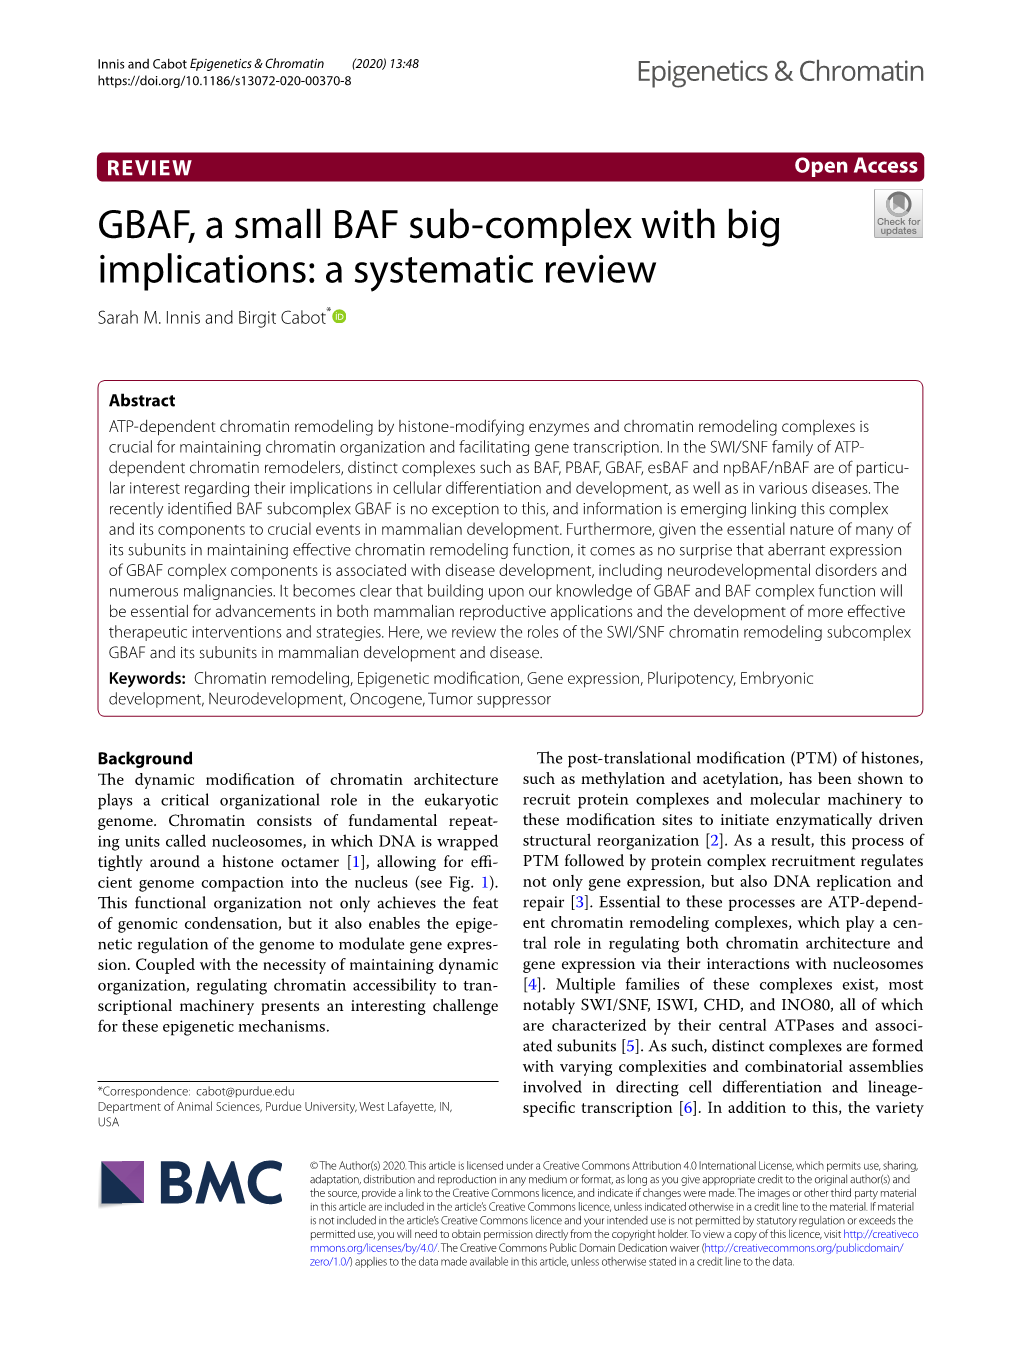 VIEW Open Access GBAF, a Small BAF Sub‑Complex with Big Implications: a Systematic Review Sarah M